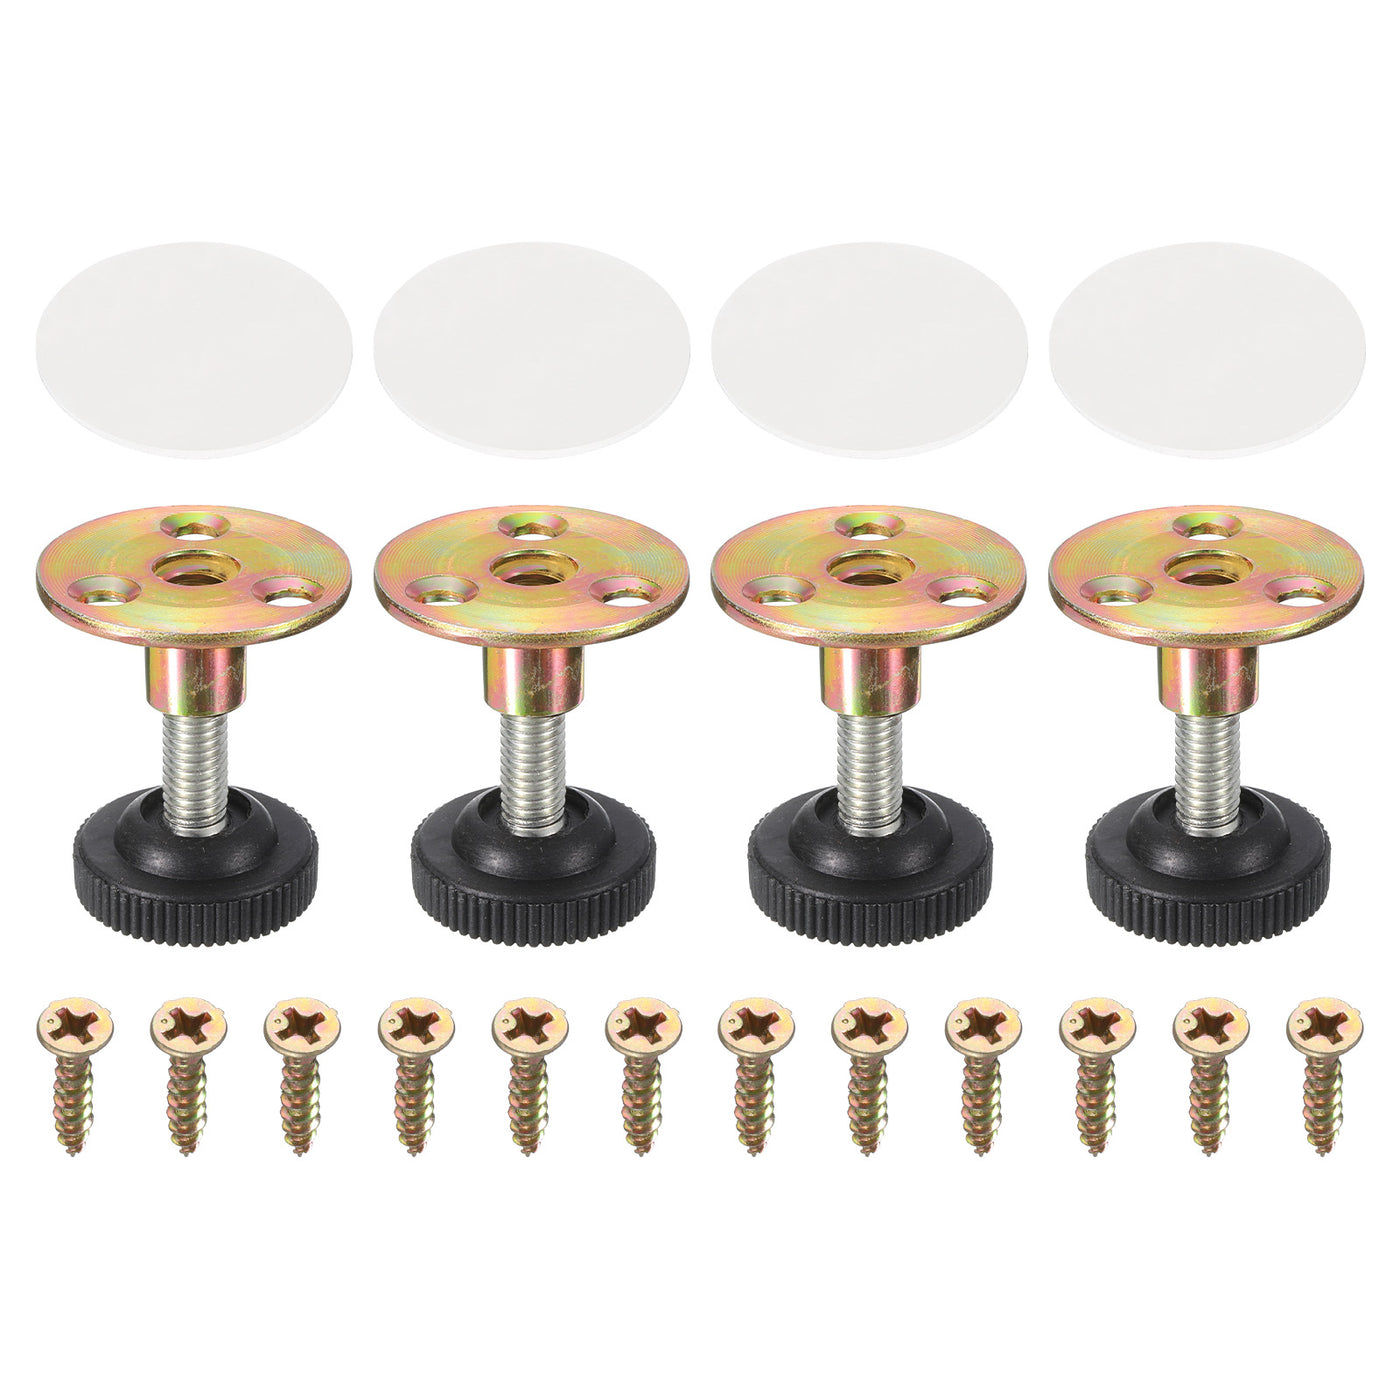 uxcell Uxcell Thread Furniture Leveling Feet, 4Pcs - Adjustable Furniture Feet Levelers, Self-adhesive Threaded Screw-in Raised Base for Tables Sofas (29 x 10 MM)